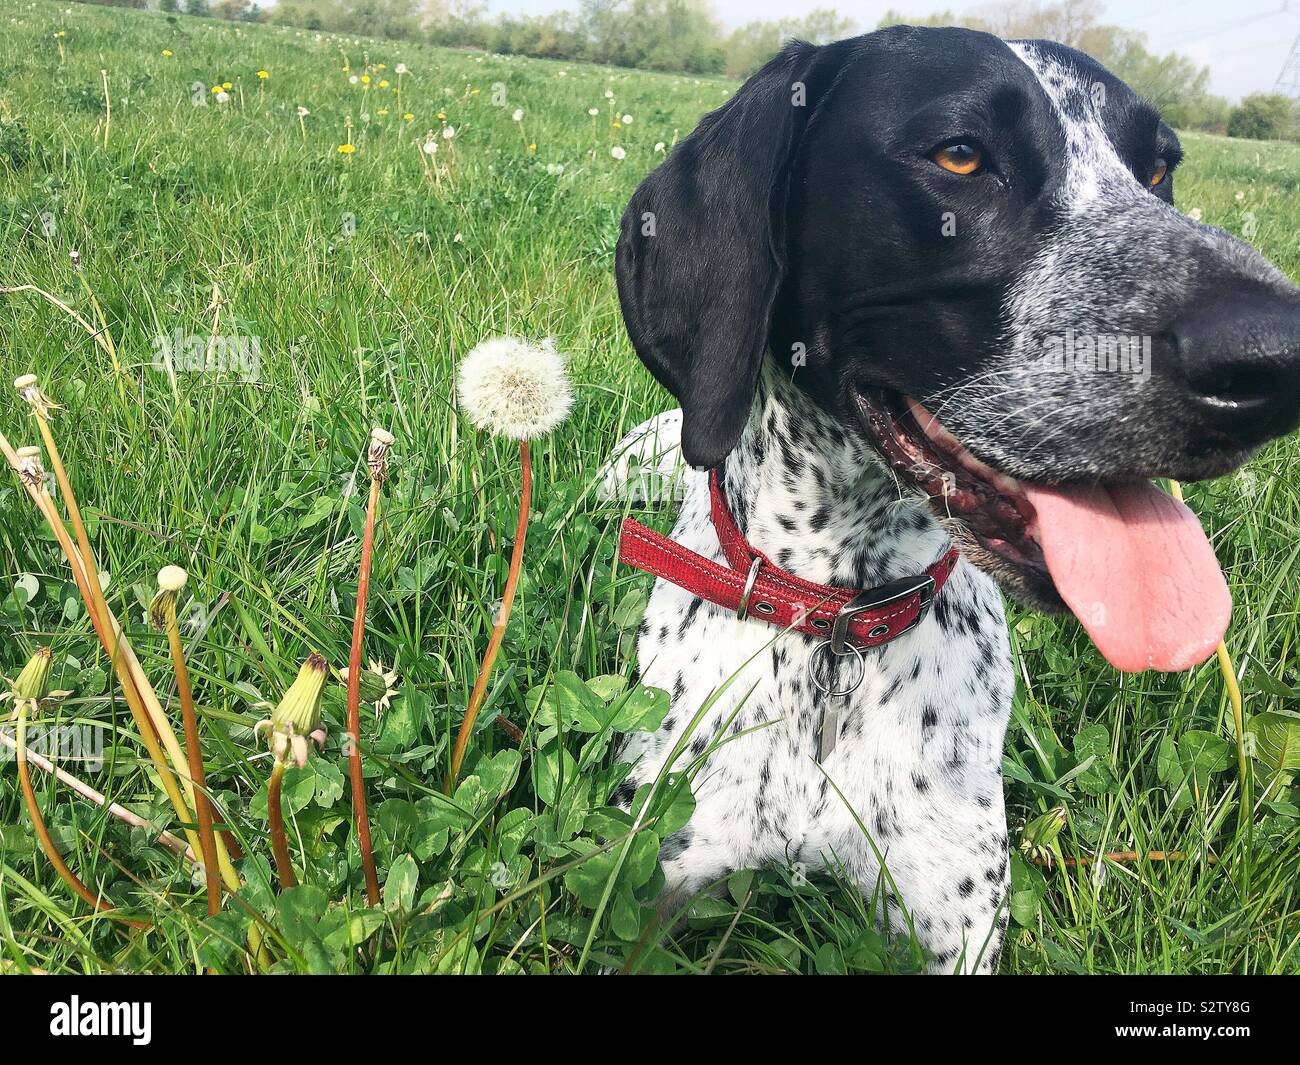 German shorthaired pointer Dog lying in field with dandelions and clover Stock Photo